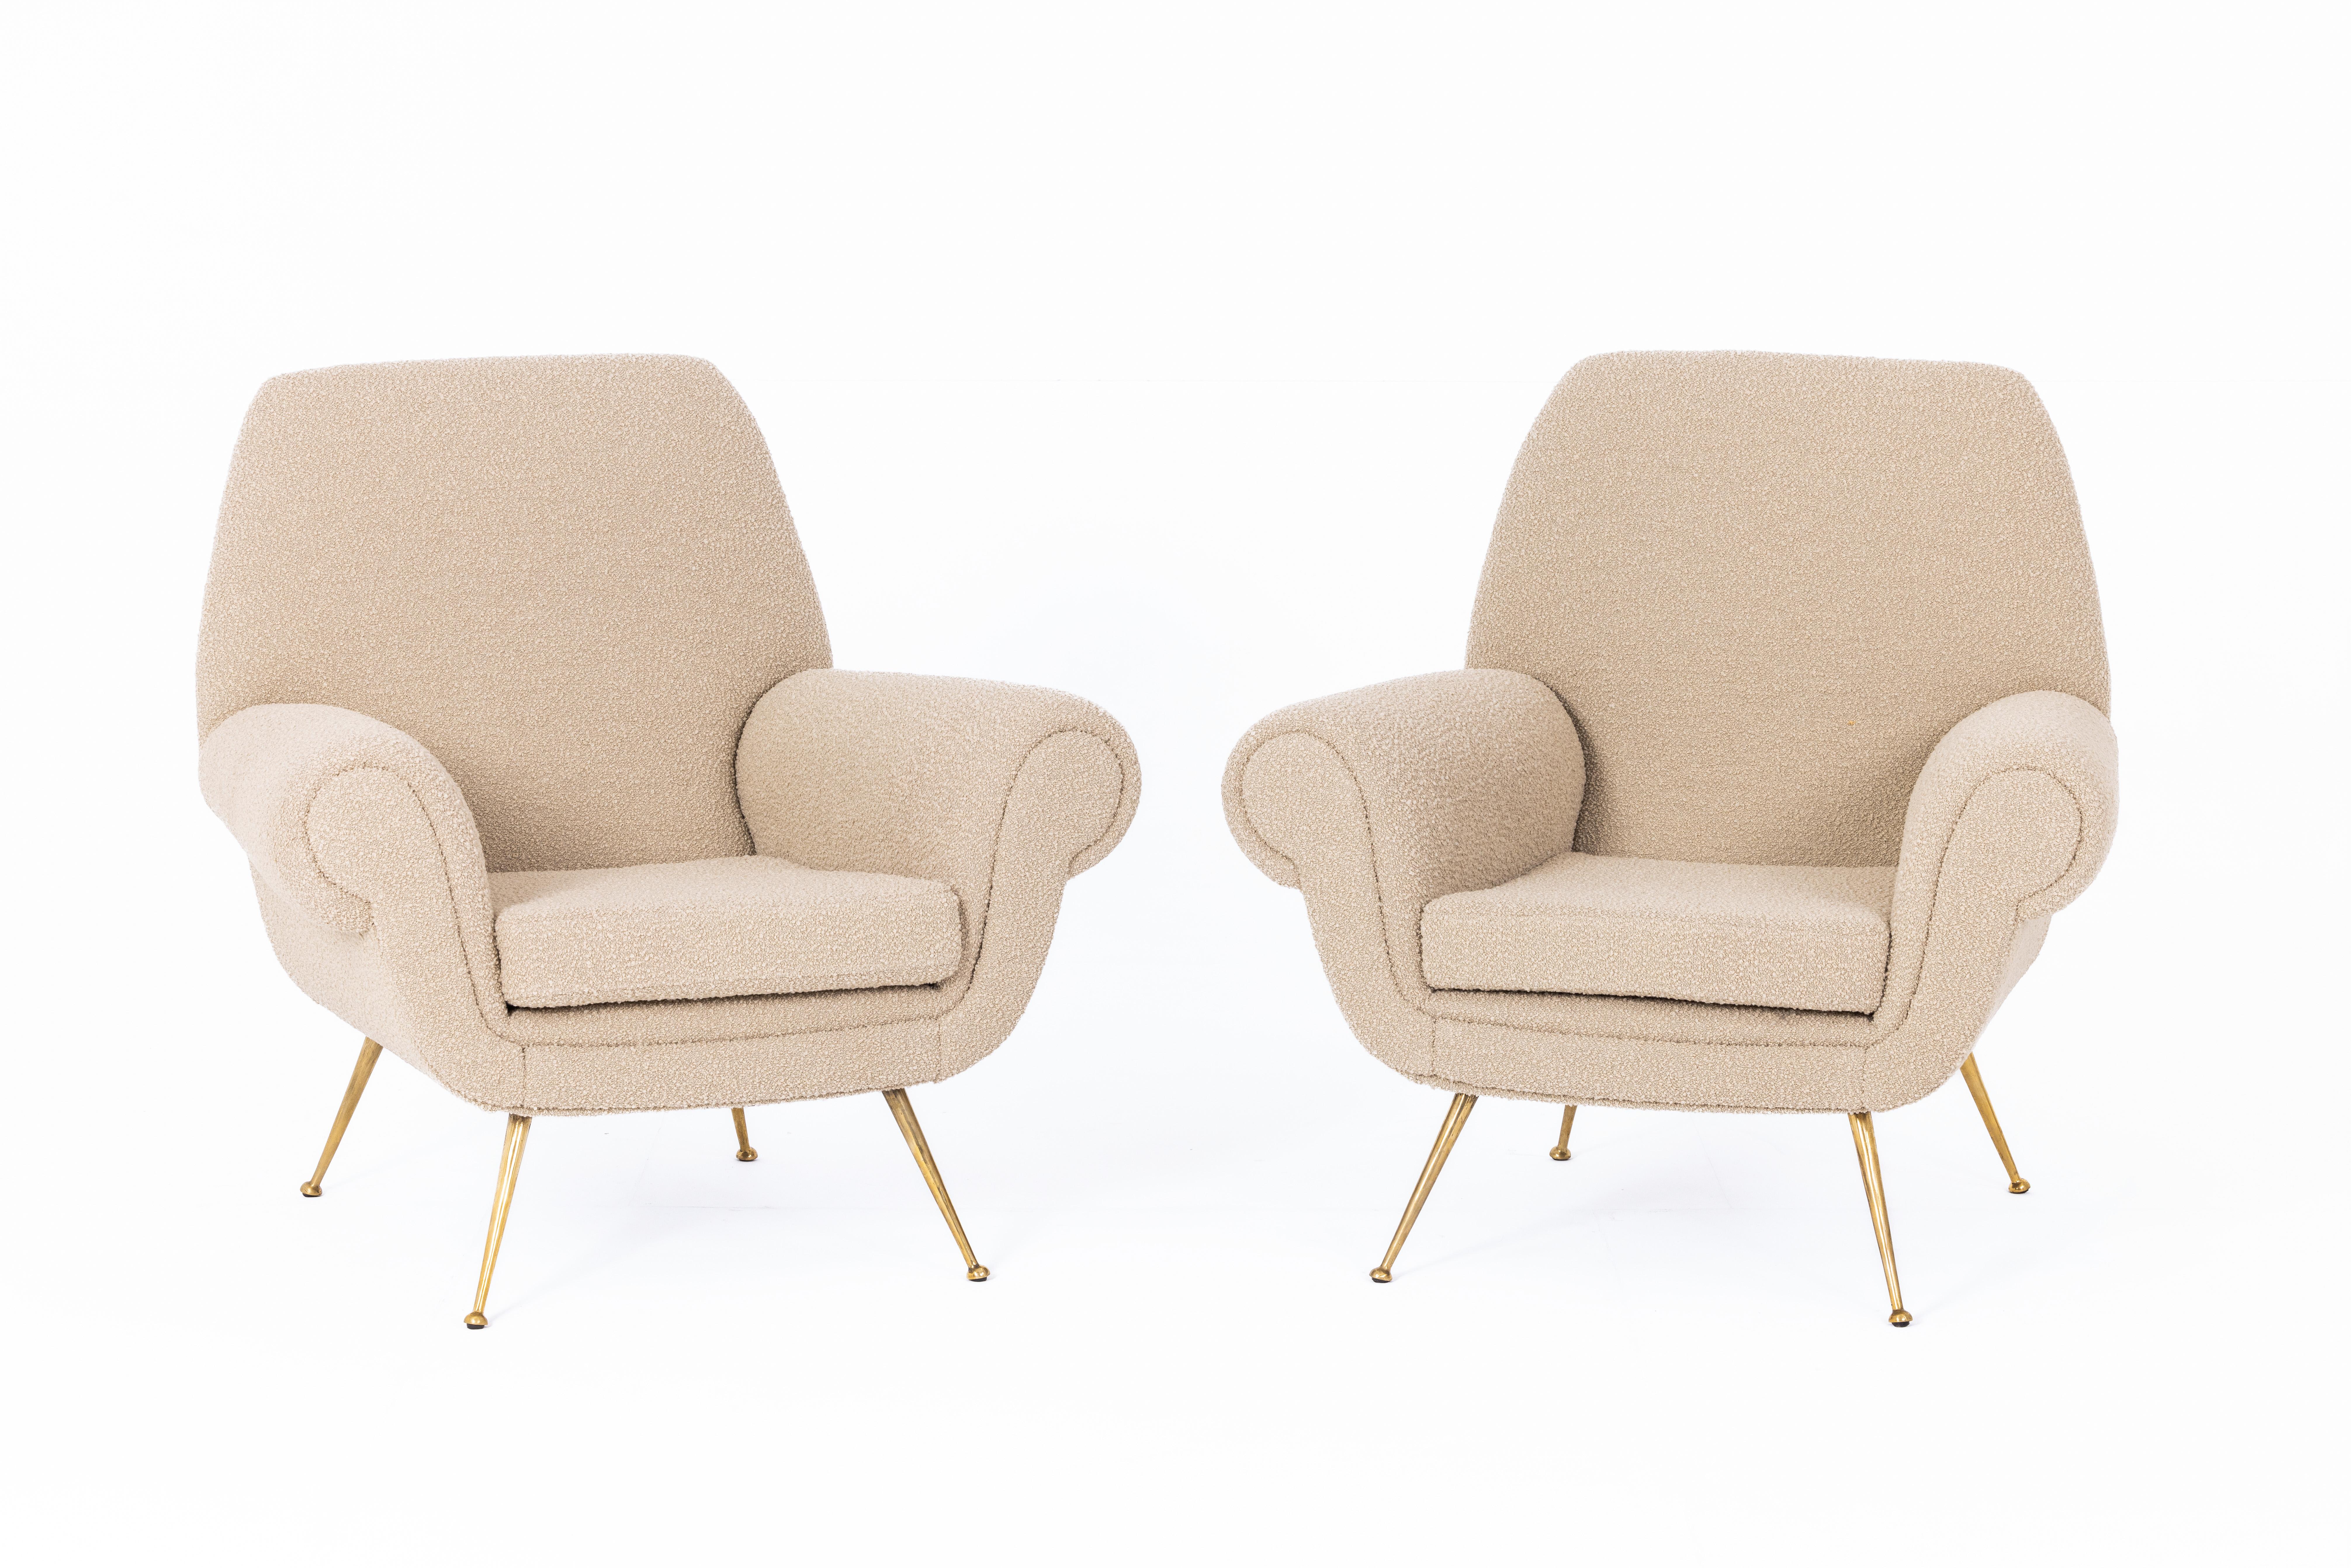 Mid-Century Modern Pair of armchairs by Gigi Radice, Italy 1950s, fabric Bisson Bruneel For Sale